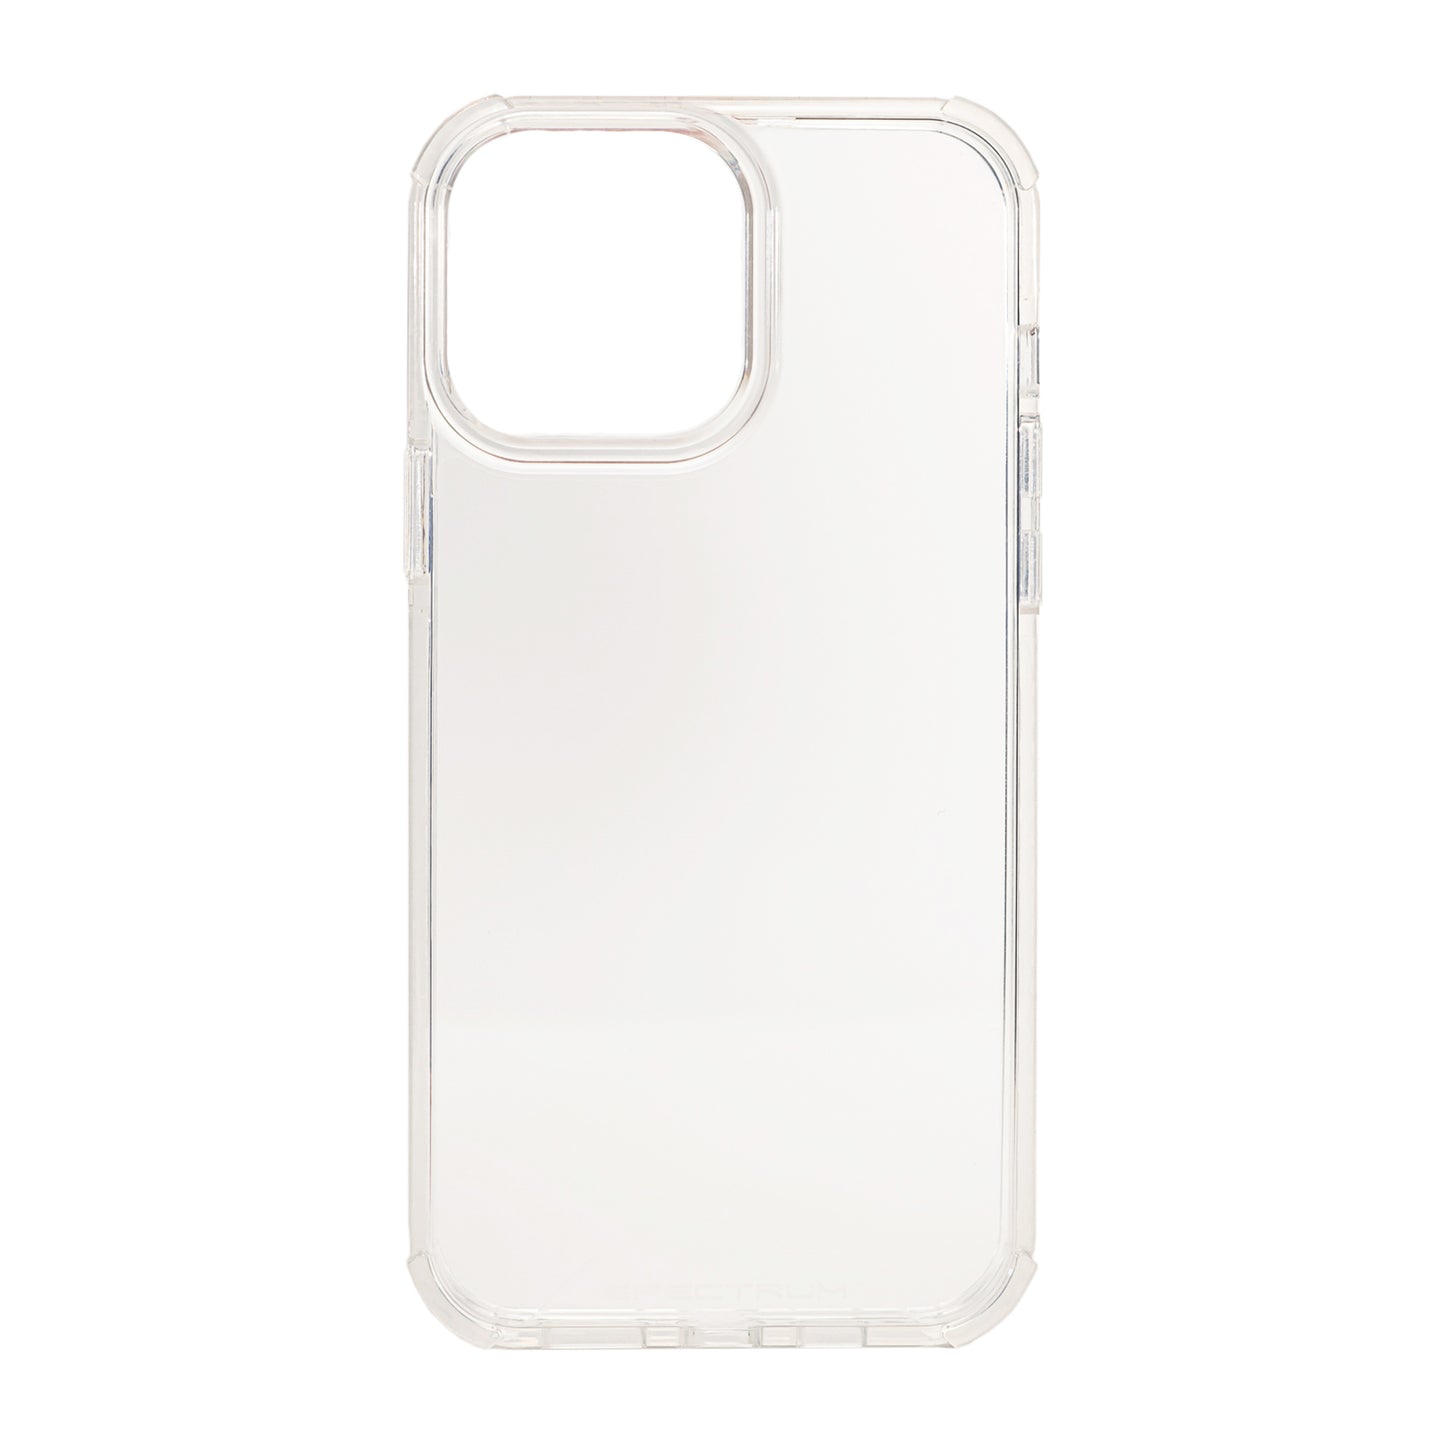 iPhone 13 Pro Max Spectrum SPECShield Rugged Case - Clear/Frost - 15-09298